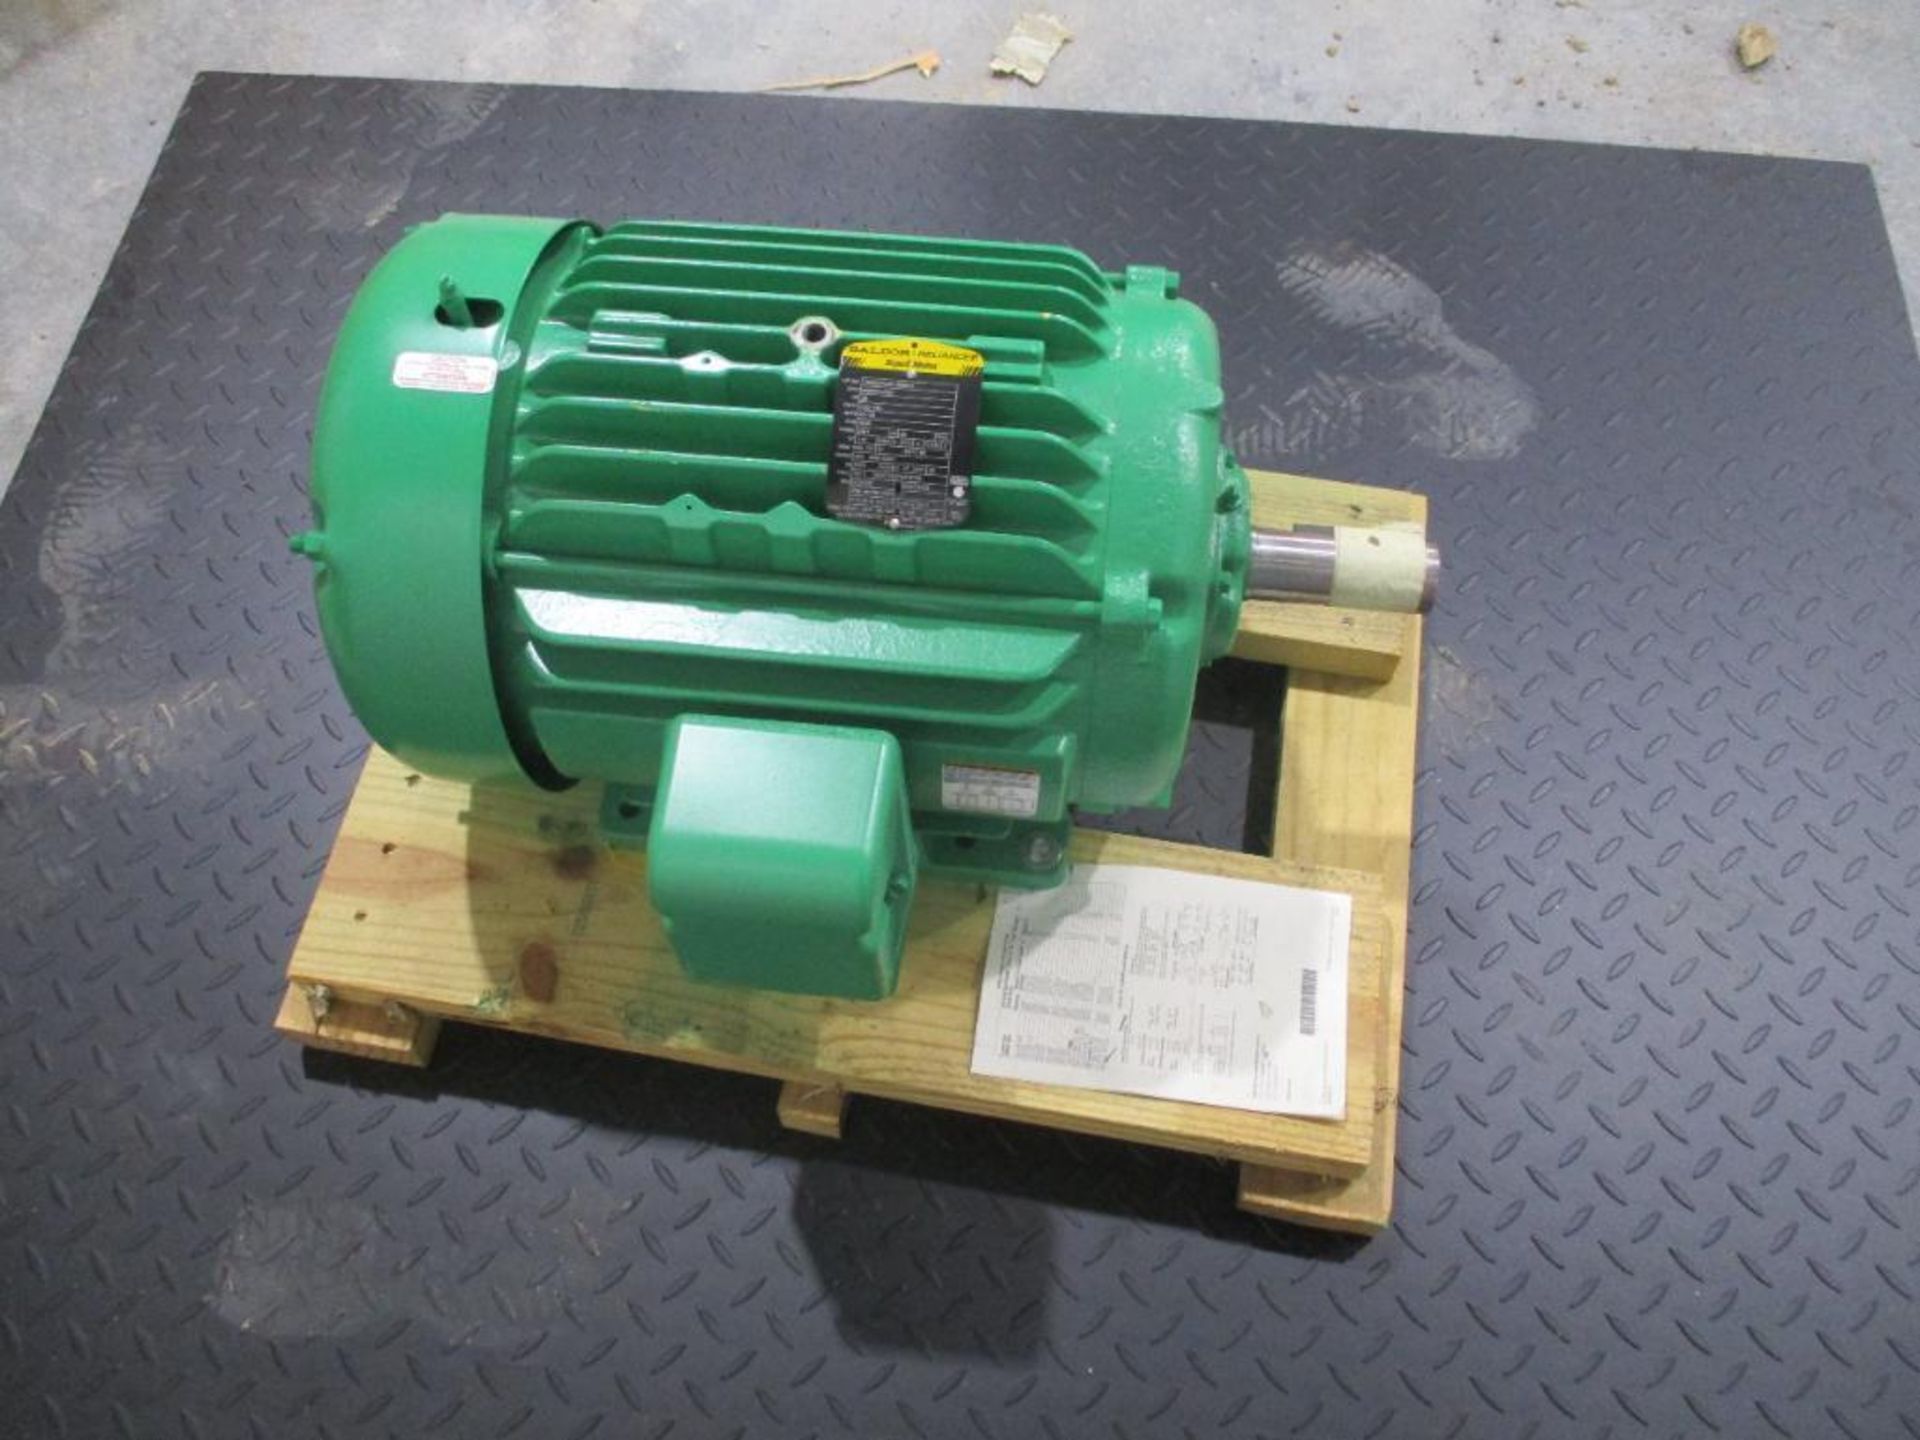 BALDOR 3 PHASE 20HP 3520RPM 256T FRAME A/C MOTOR P/N 1208027540-000010, 245# lbs (There will be a $4 - Image 3 of 6